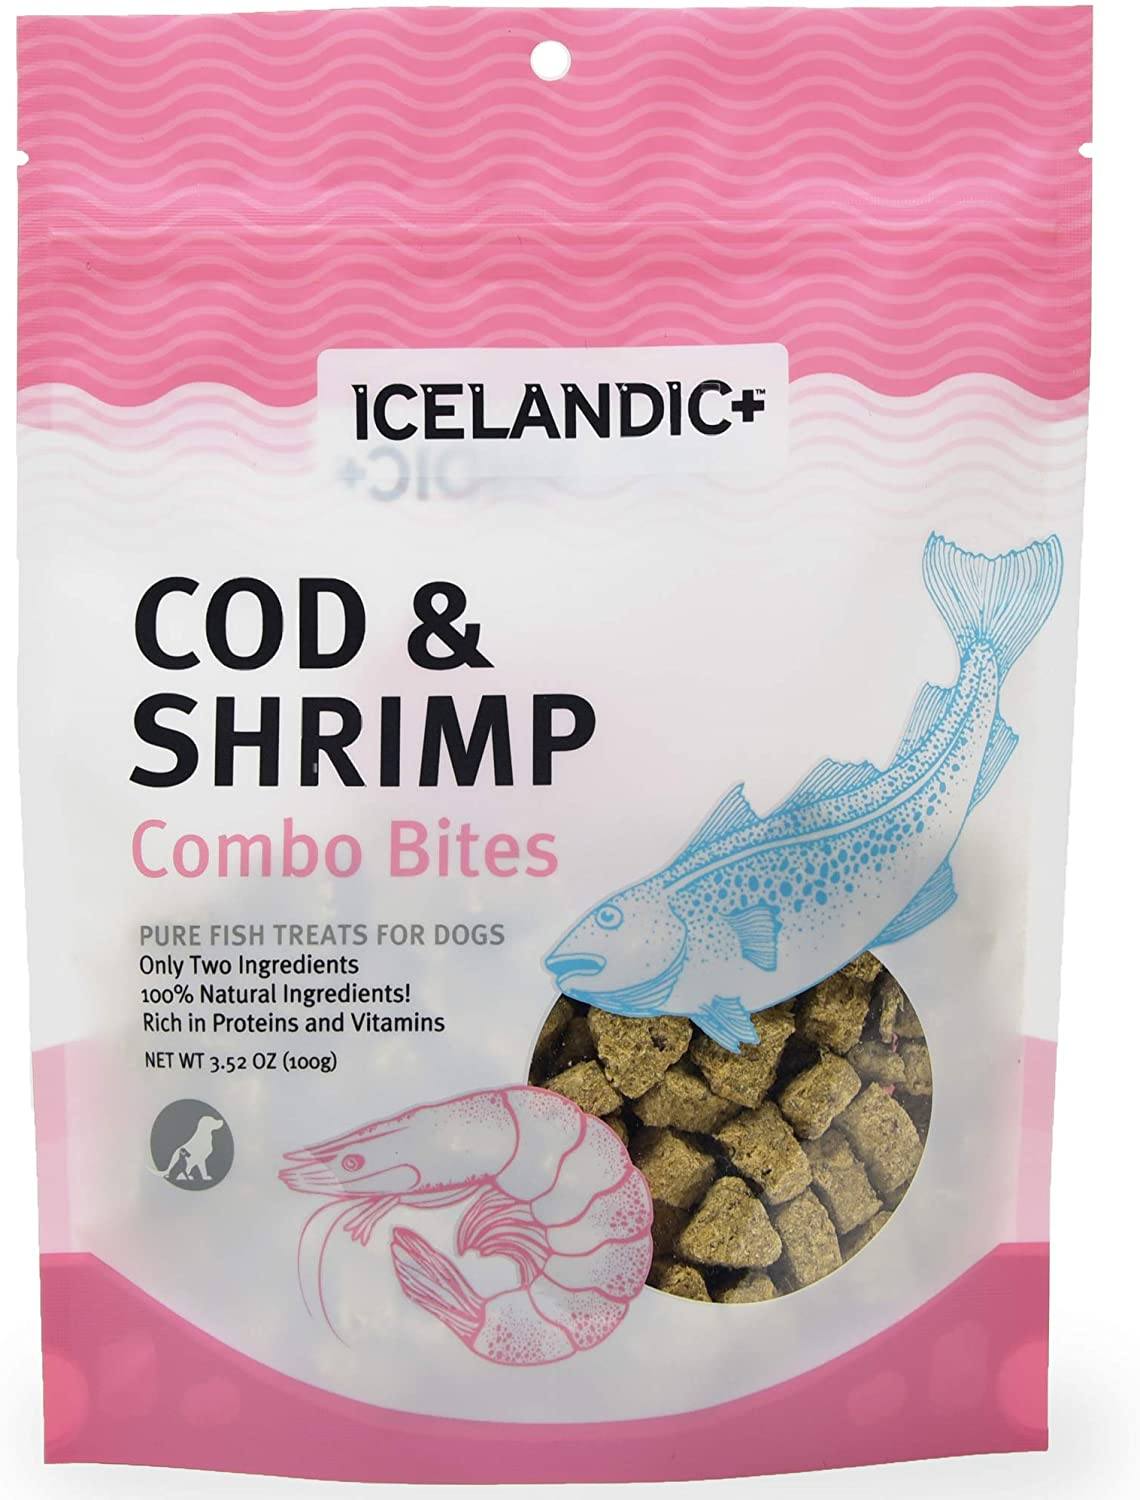 Icelandic+ Cod & Shrimp Combo Bites Natural Chewy Cat and Dog Treats - 3.52 oz  